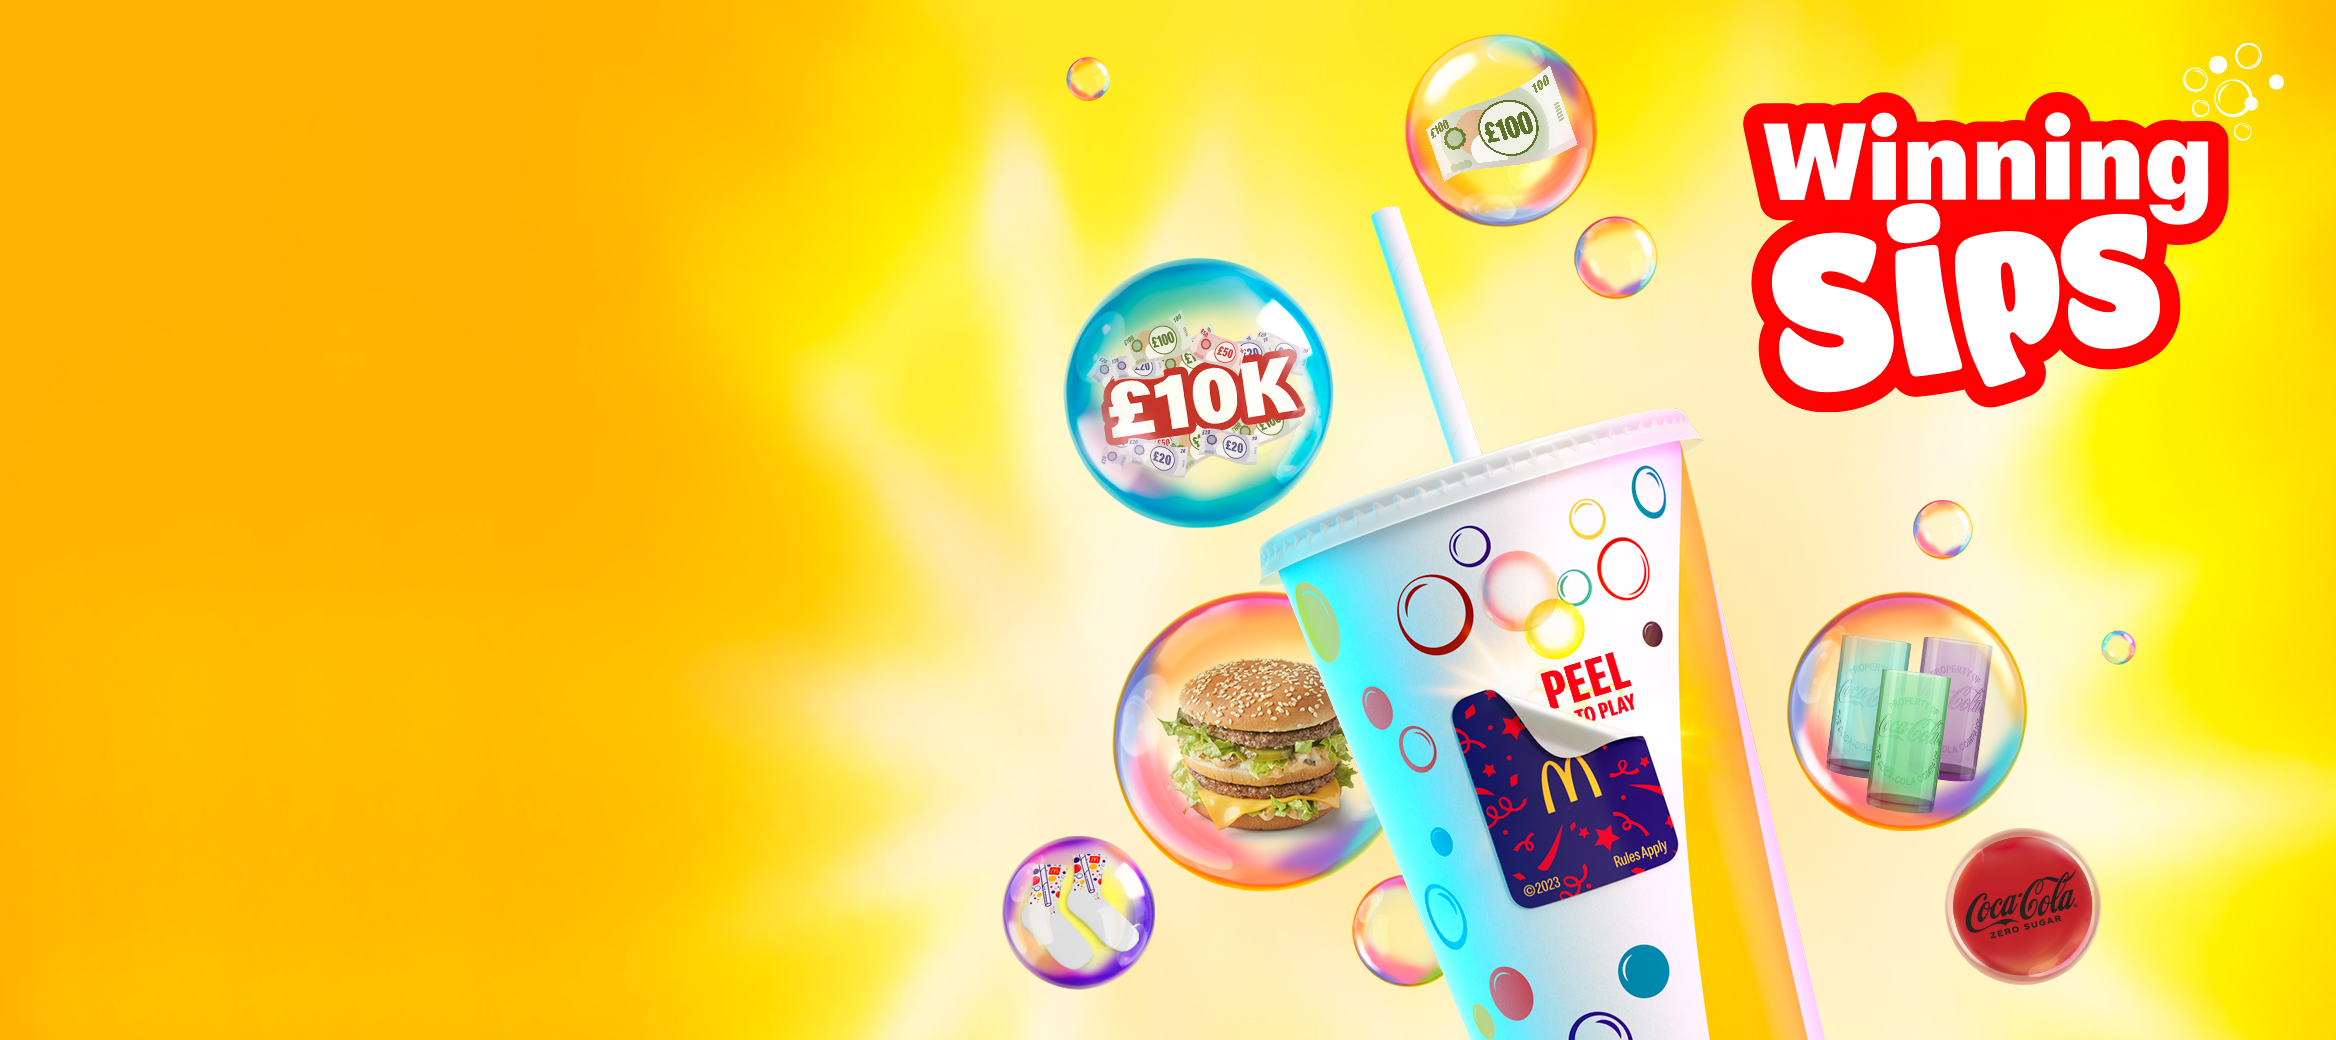 McDonald’s drink cup, Big Mac, trainers, money, coca-cola and glasses on a yellow background.